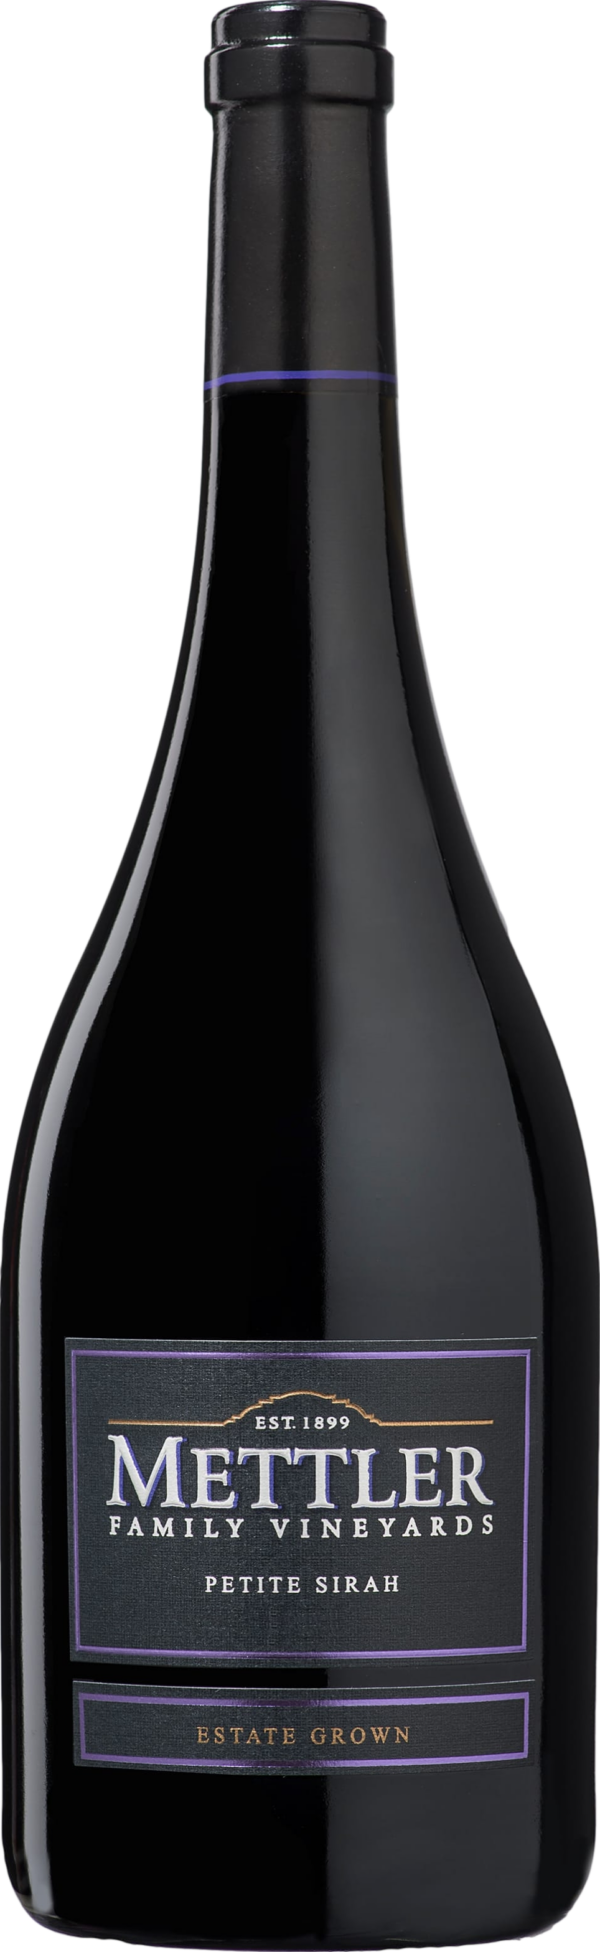 Product image of Mettler Petite Sirah 2019 from 8wines